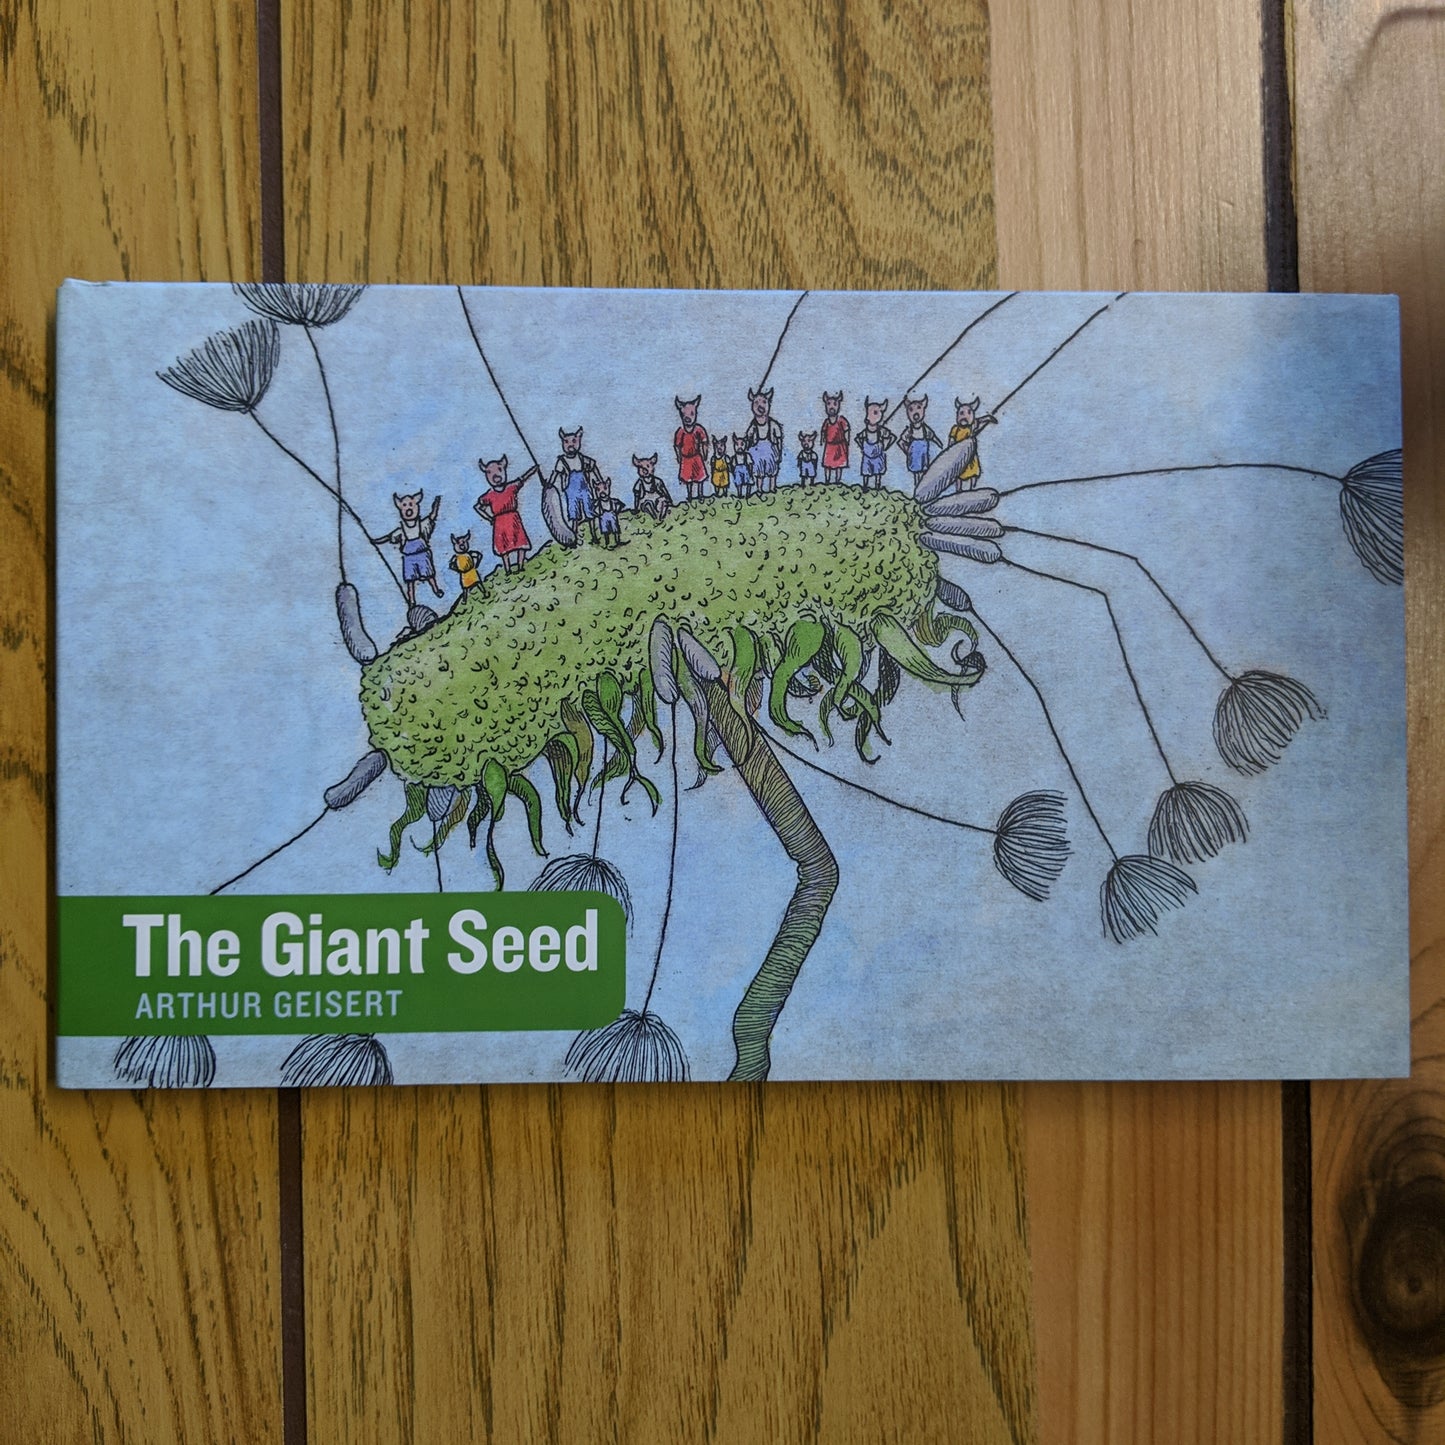 The Giant Seed